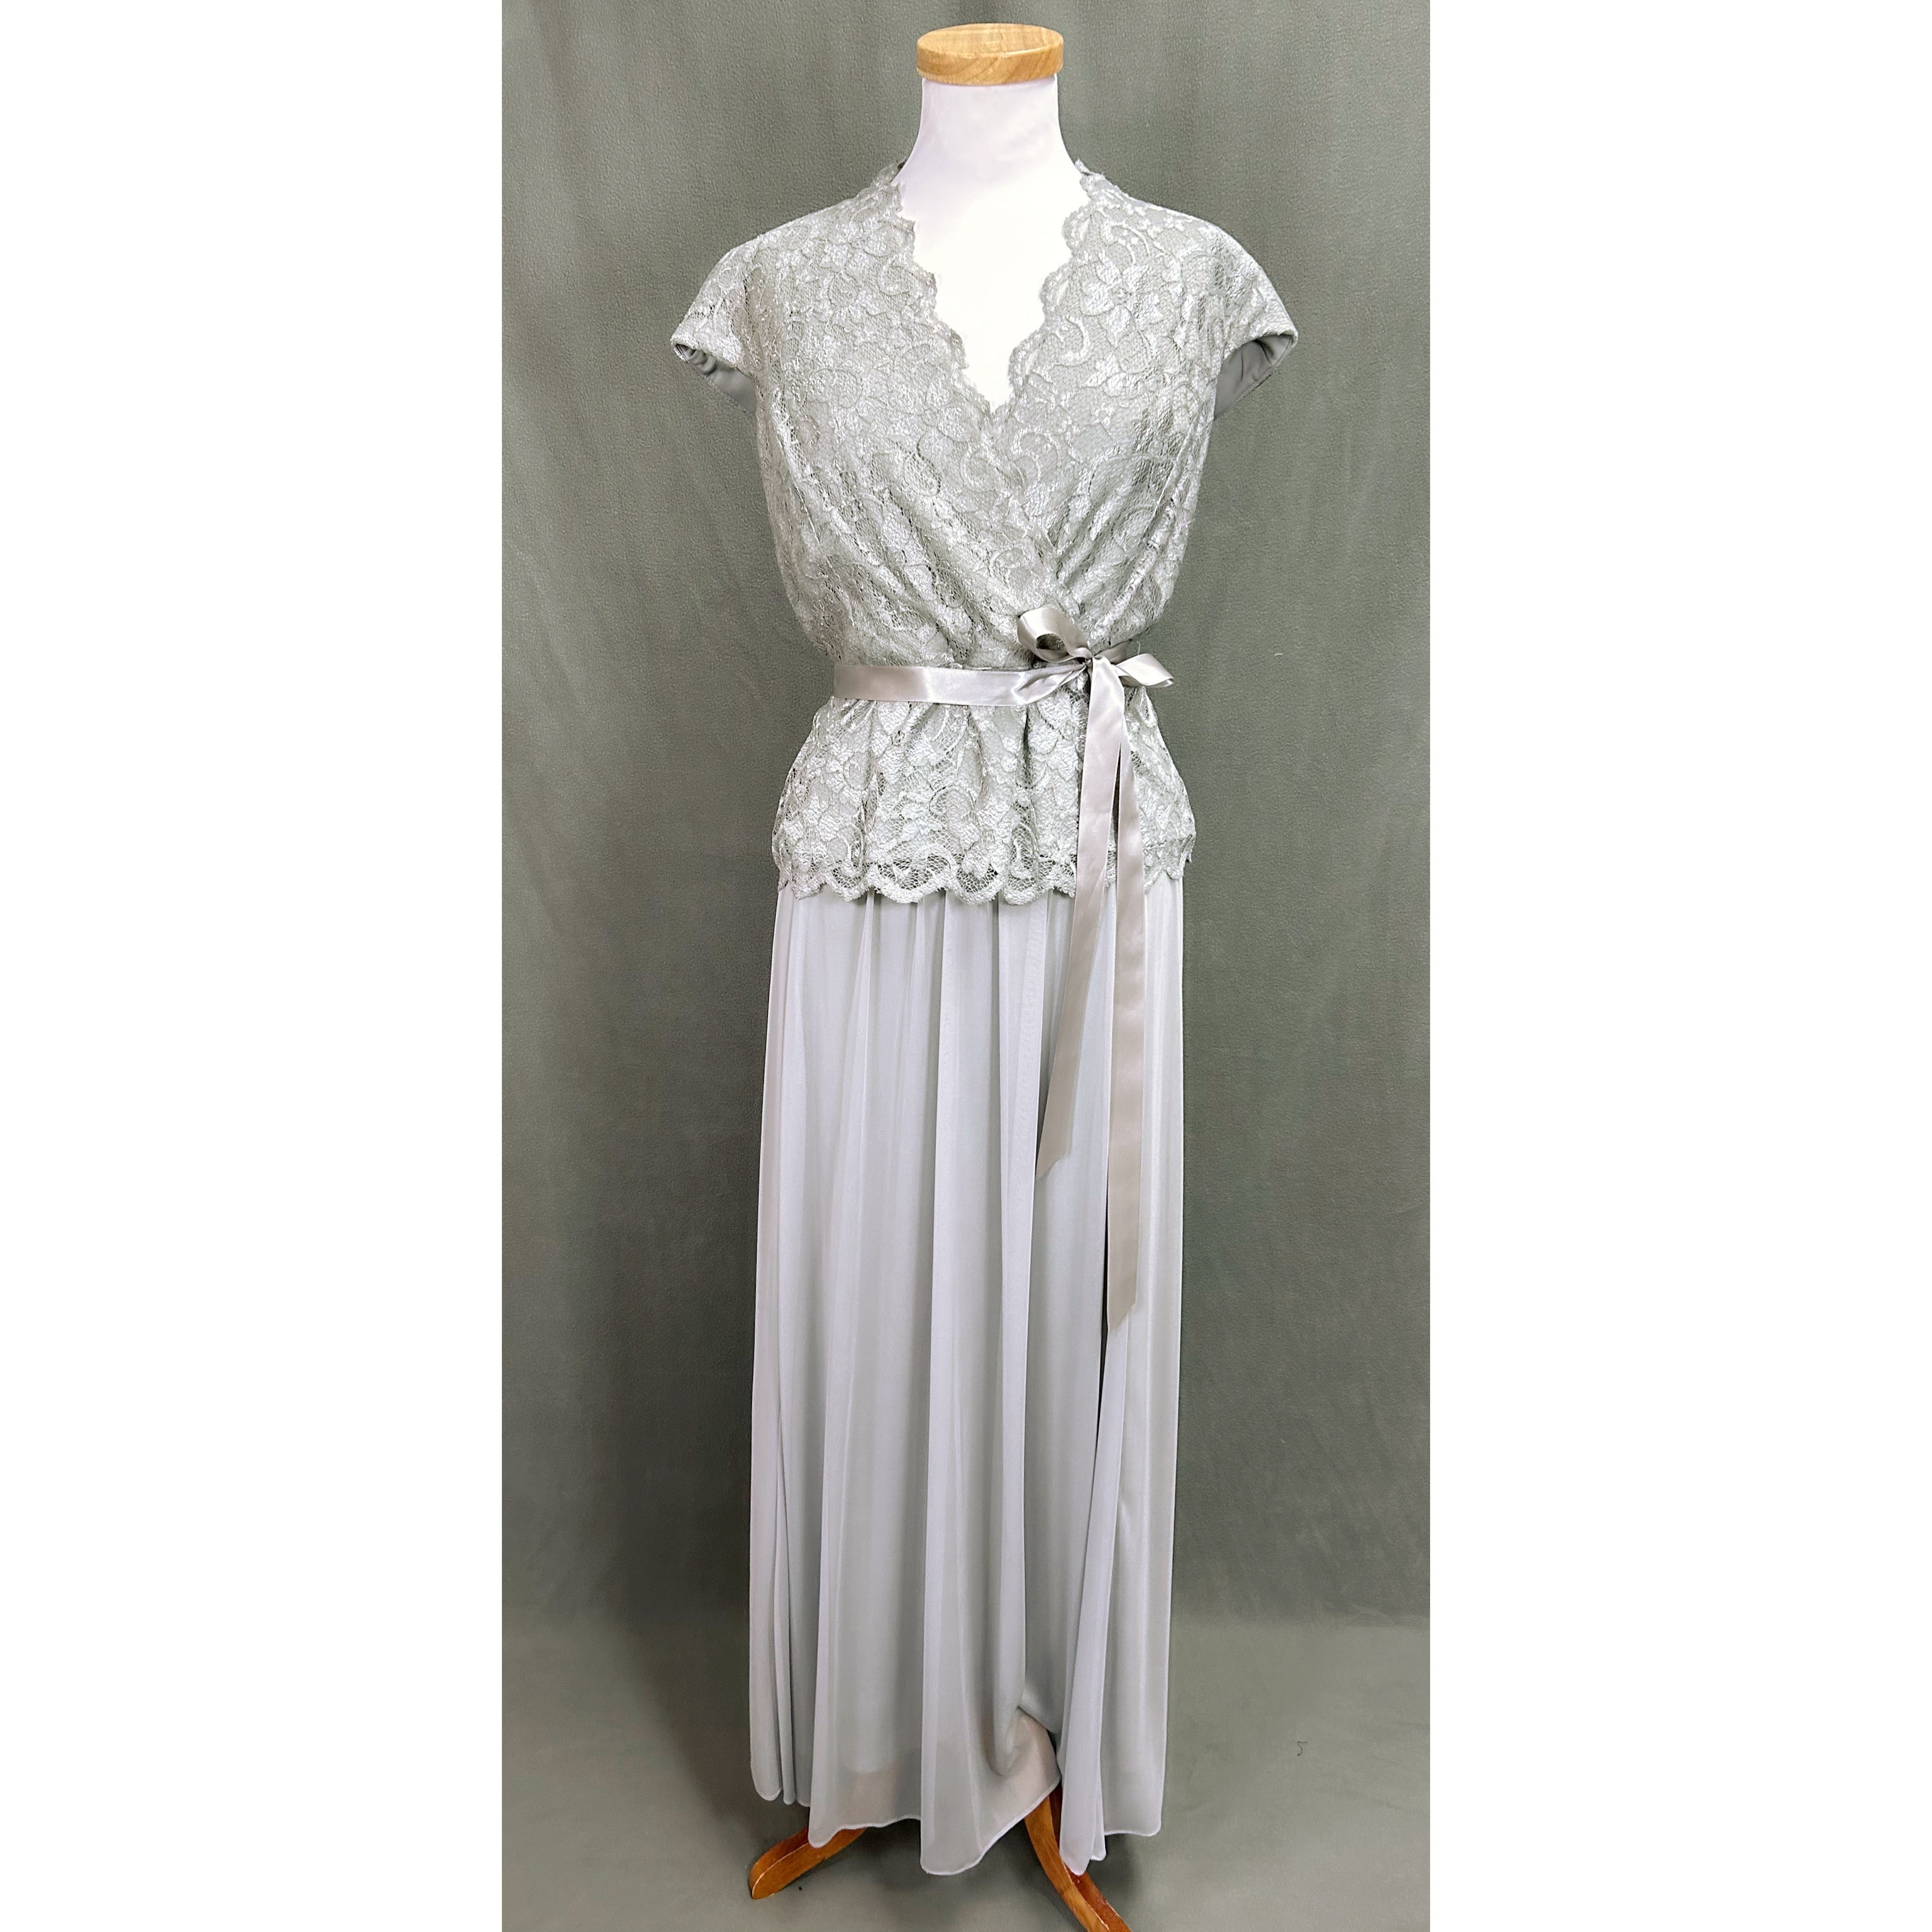 Alex Evenings pale gray dress, size 12, NEW WITH TAGS!